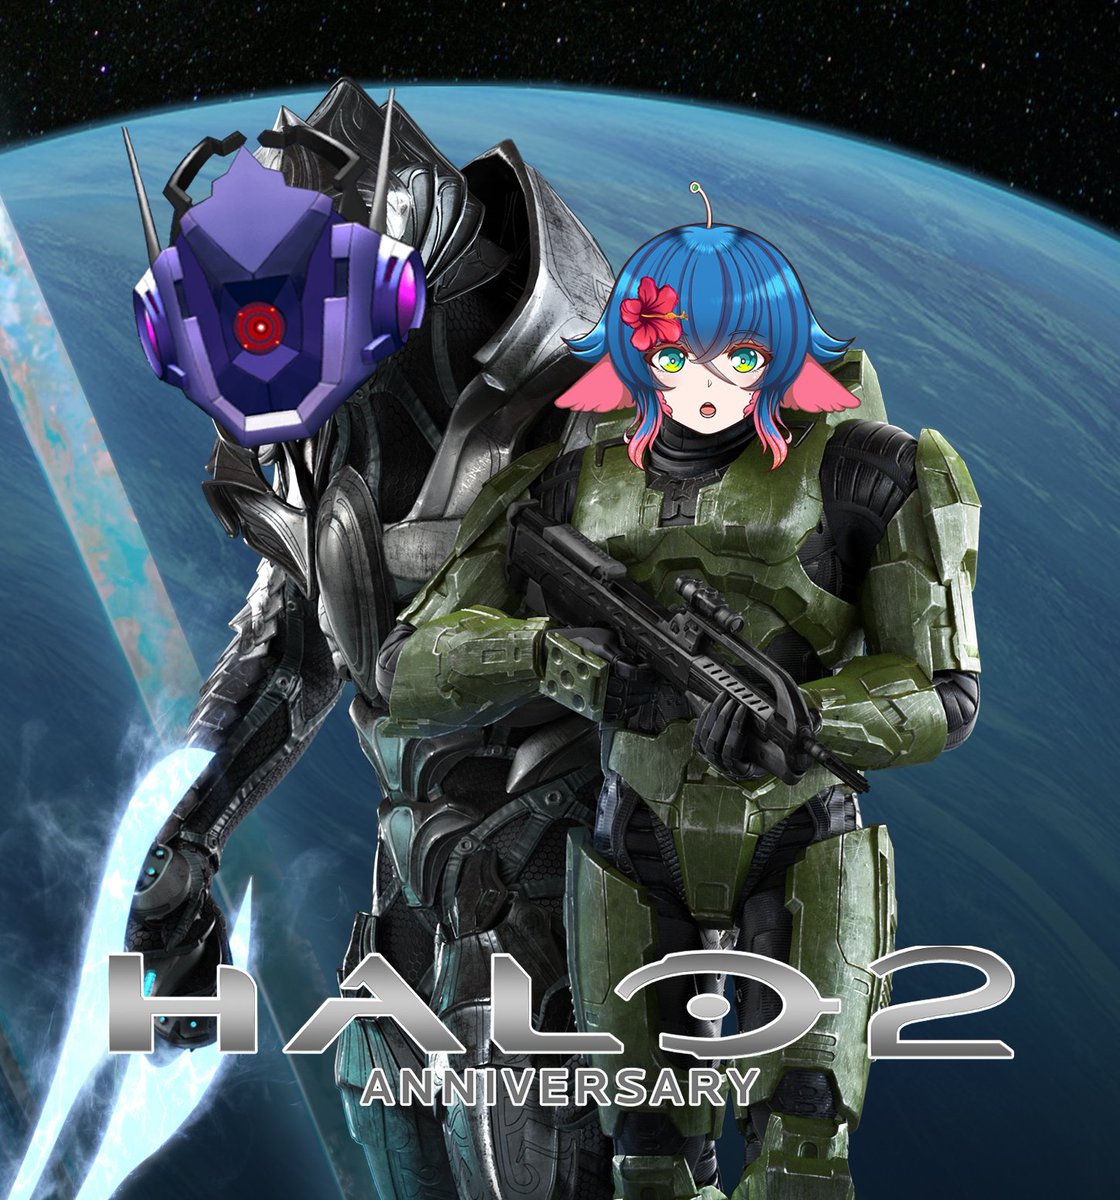 We'll be continuing into Halo with @LtMortimer!
As we enter into this new journey, he will be guiding me through into Halo 2: Anniversary now!!
twitch.tv/laystarvt

#MYVTuber #ENVTuber #Vtubers #VTuberUprising #Halo